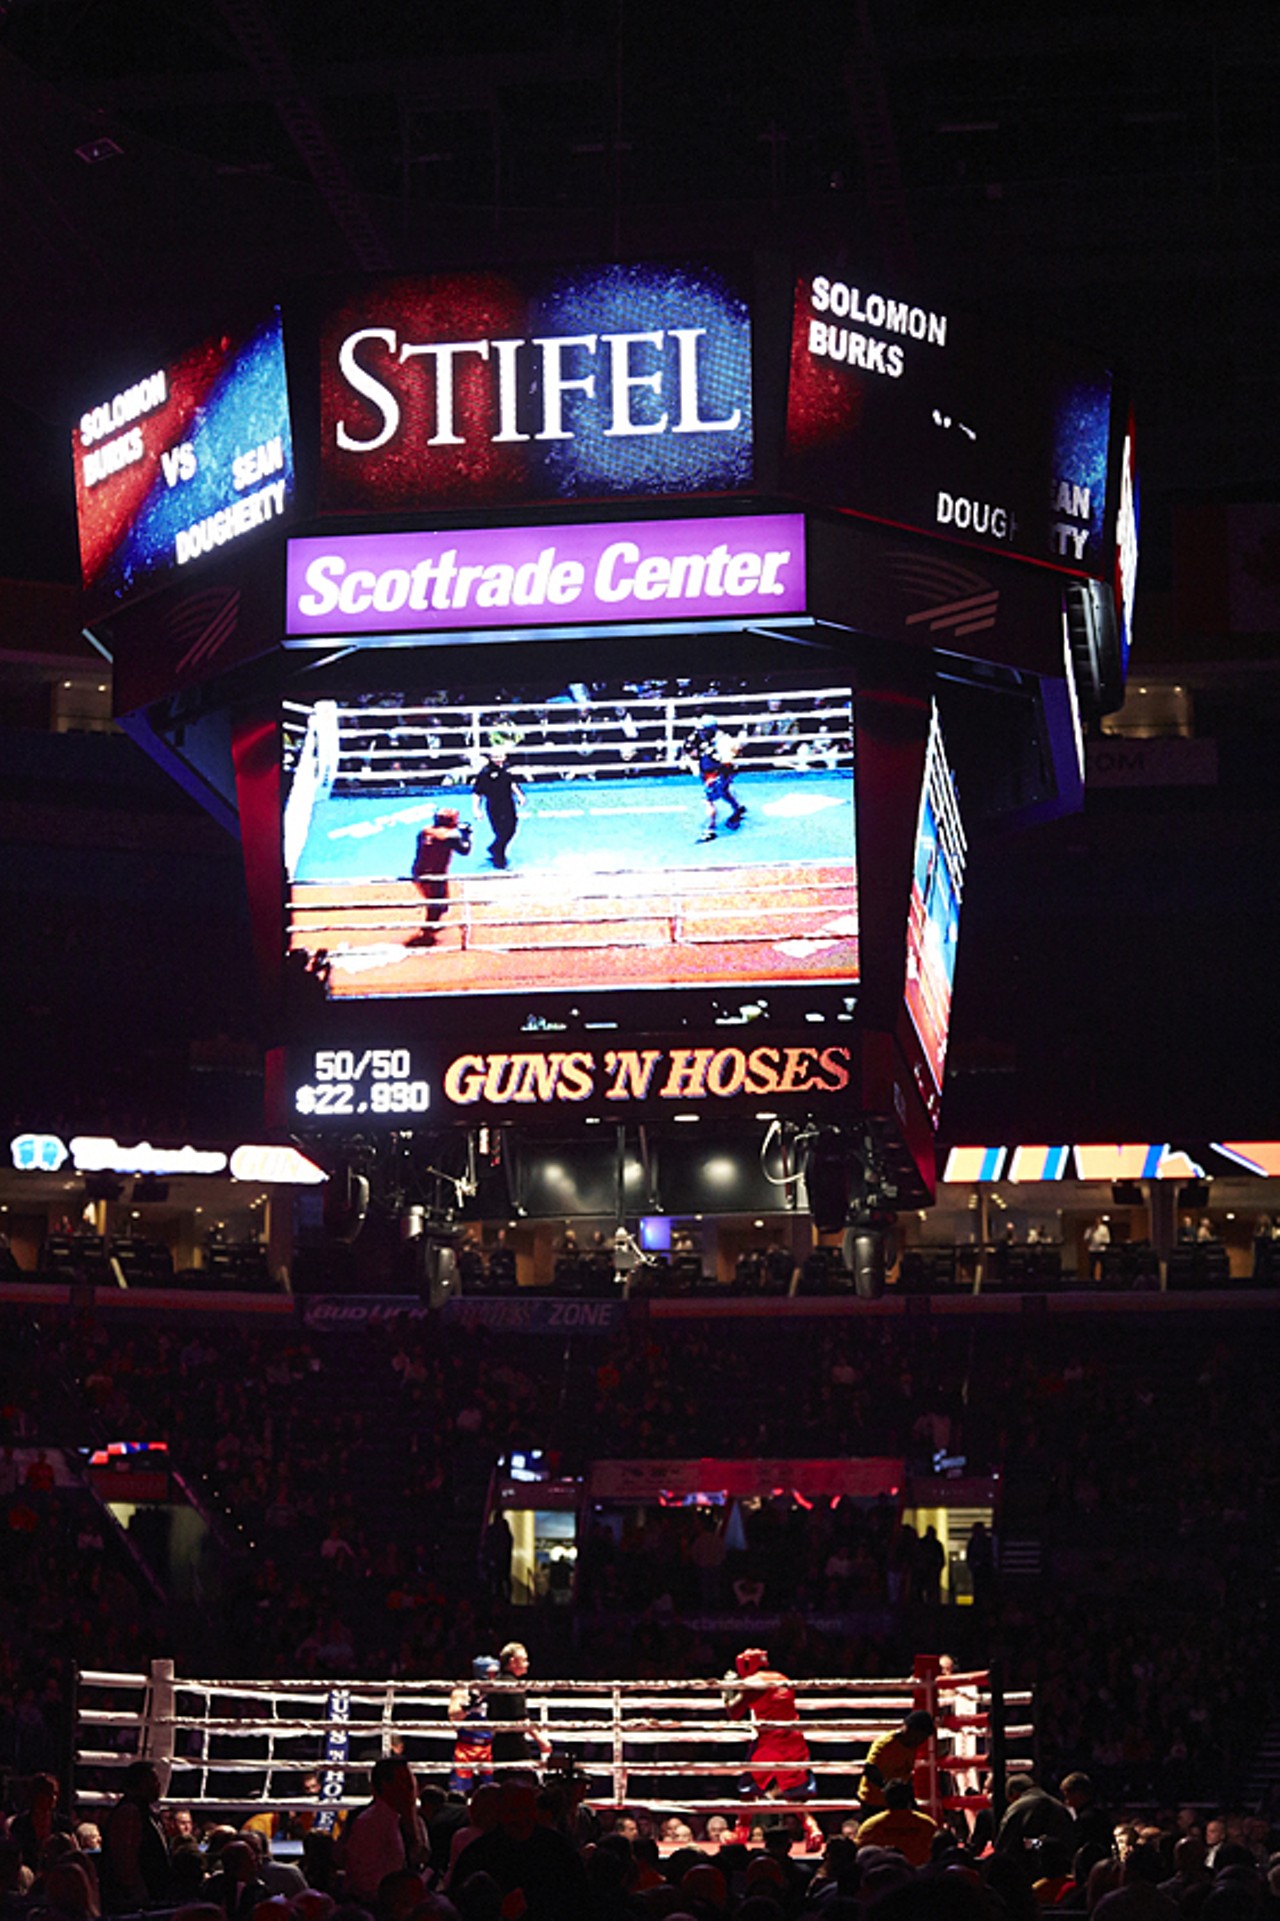 The jumbotron at the 28th Annual Budweiser Guns 'N Hoses Boxing match held at the Scottrade Center.